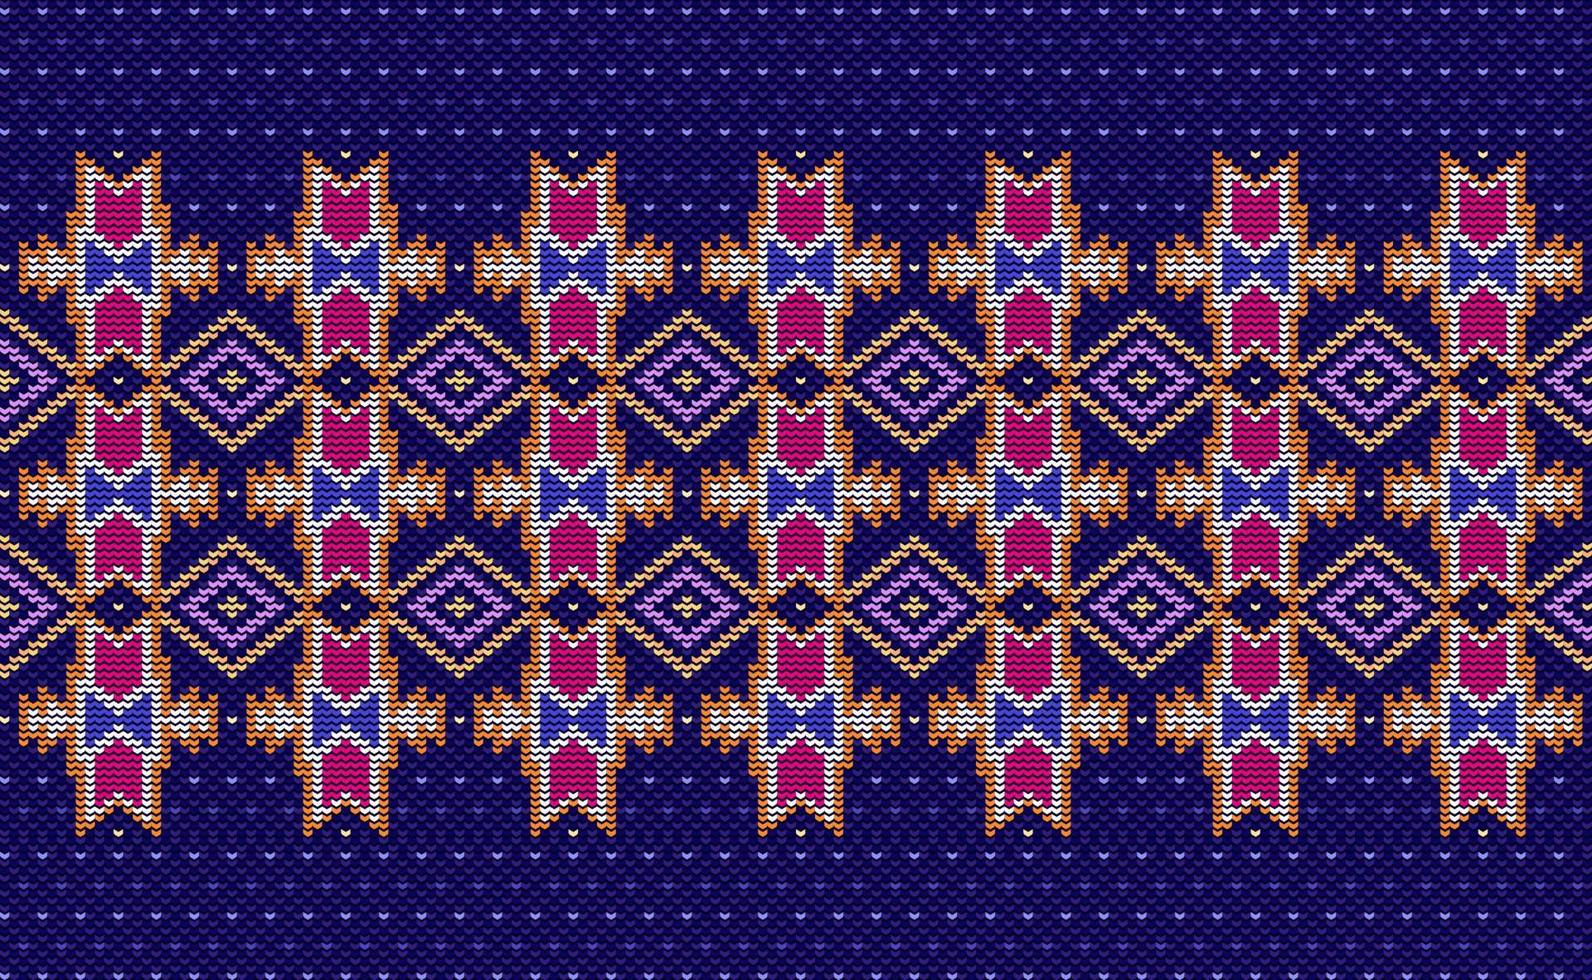 Sweater knitting pattern, Vector knitted abstract Navajo style, Pink and blue pattern geometry design